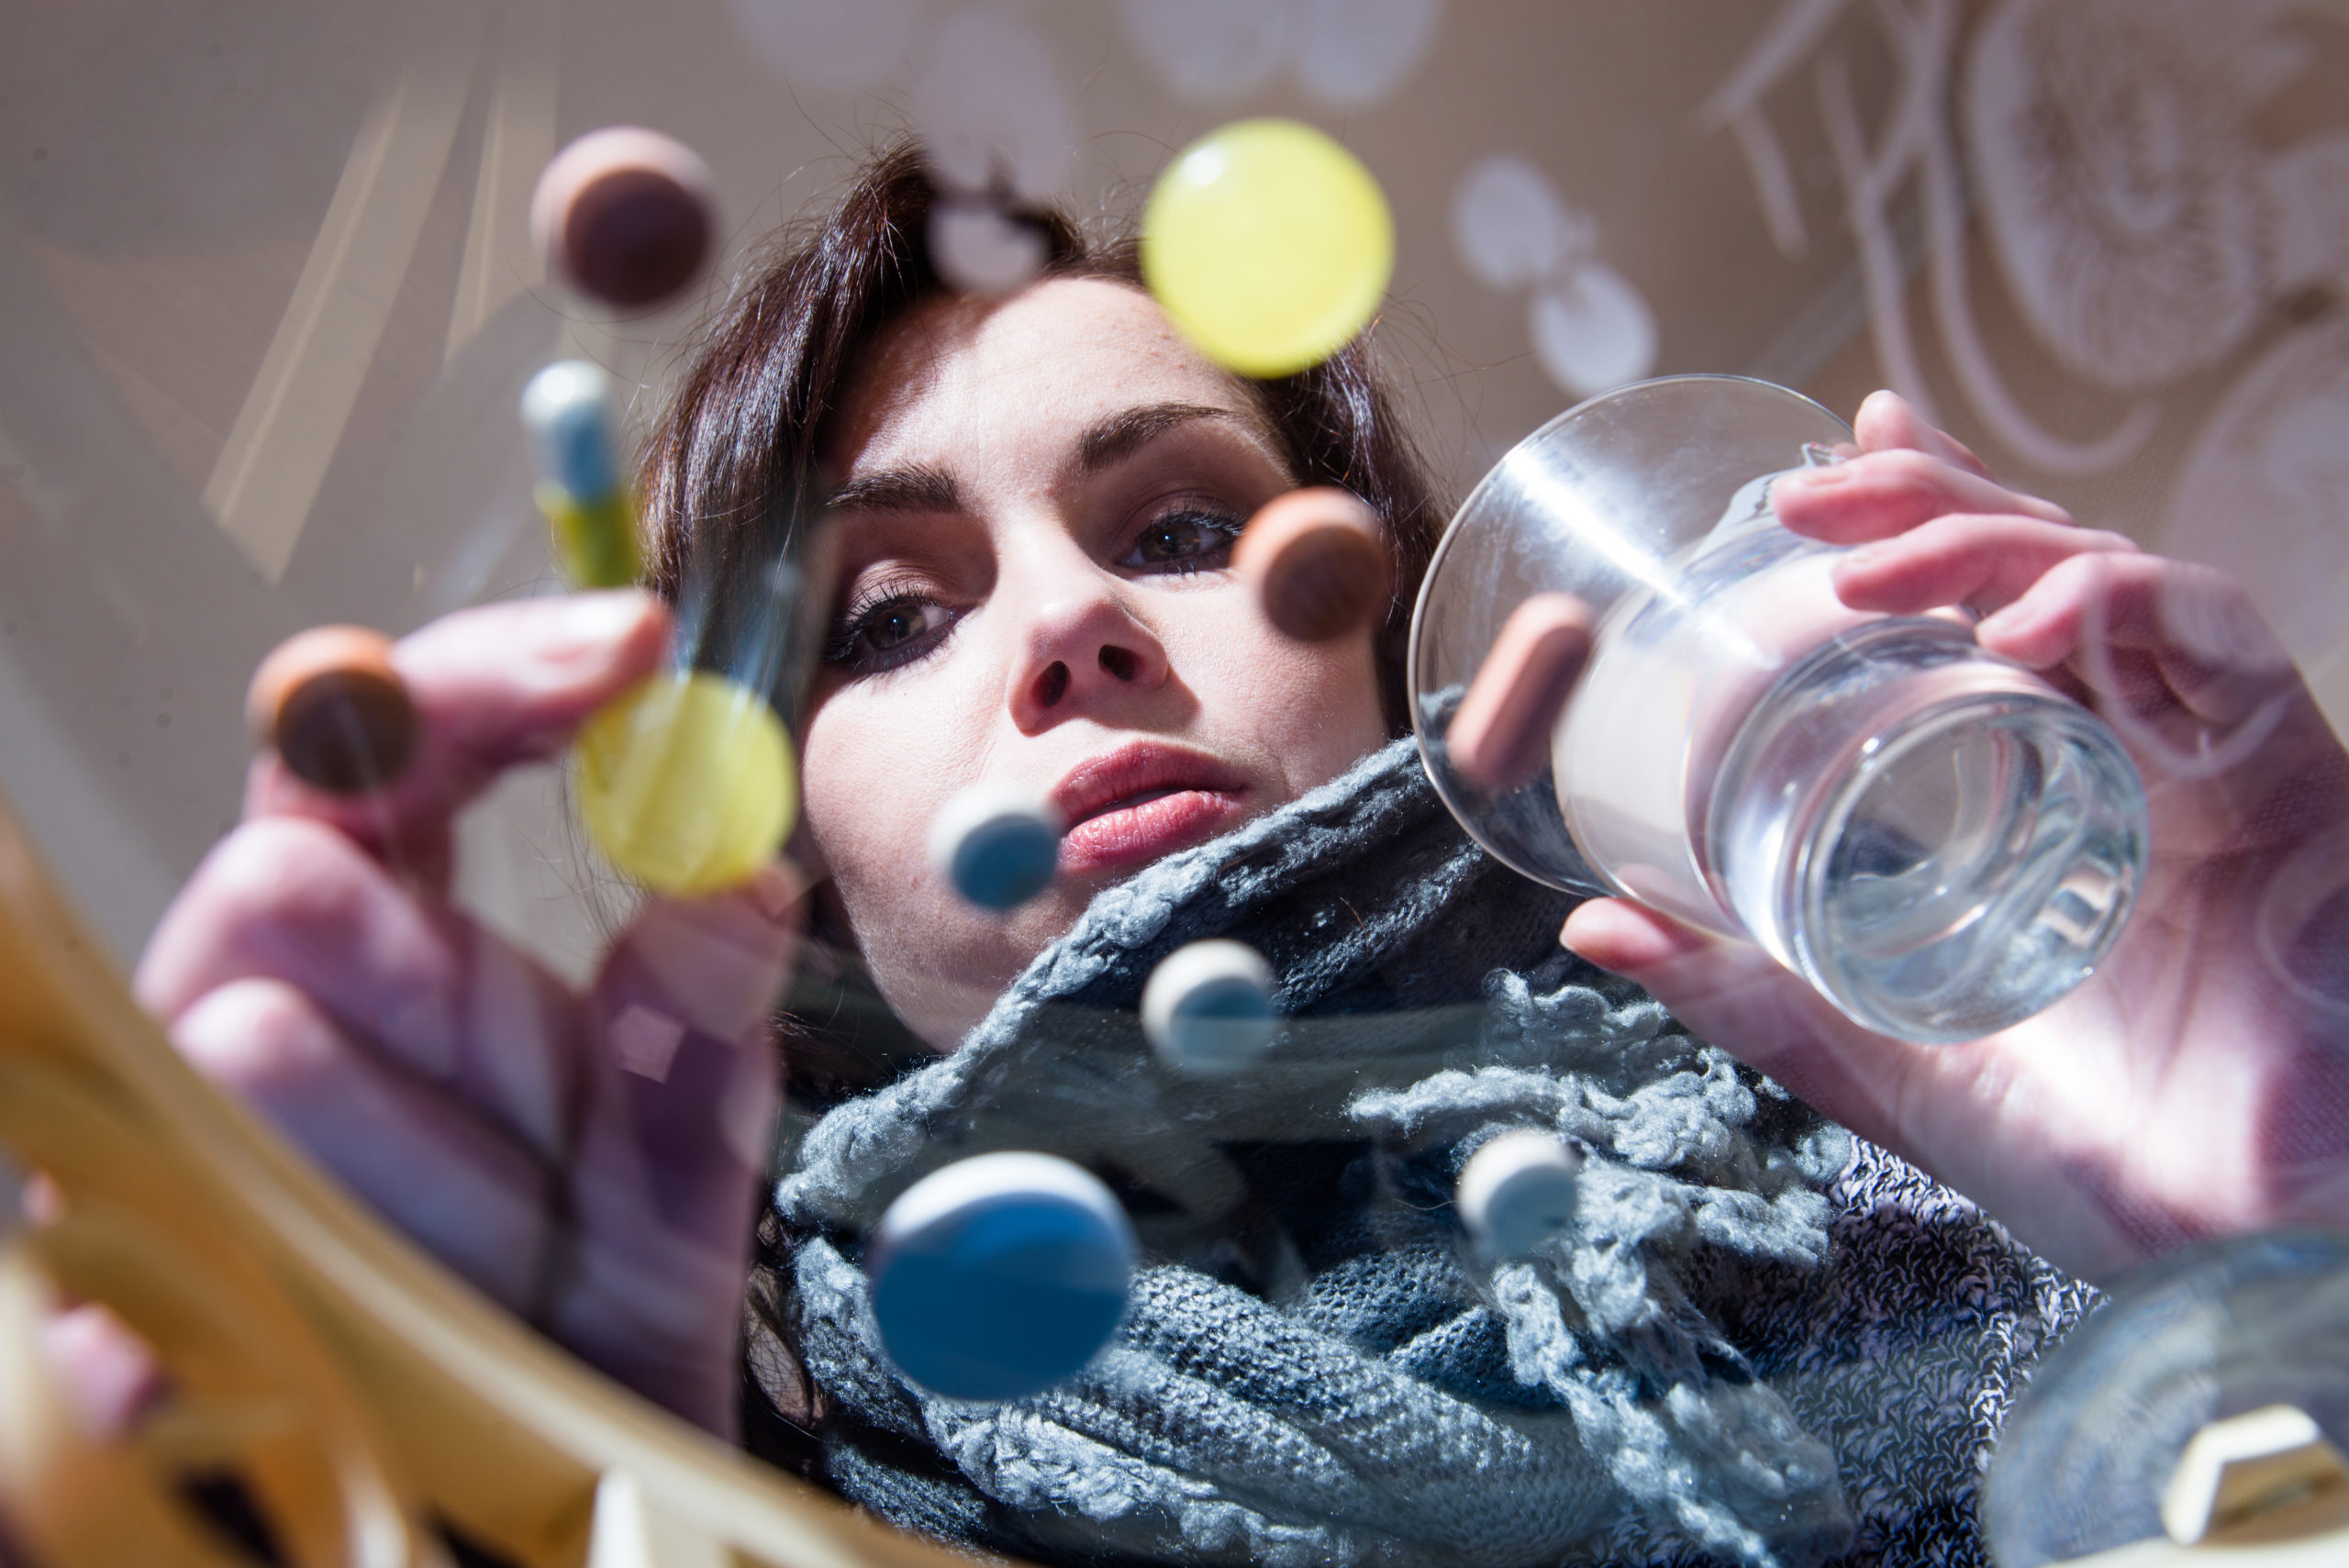 The Signs of Being Addicted to Prescription Drugs